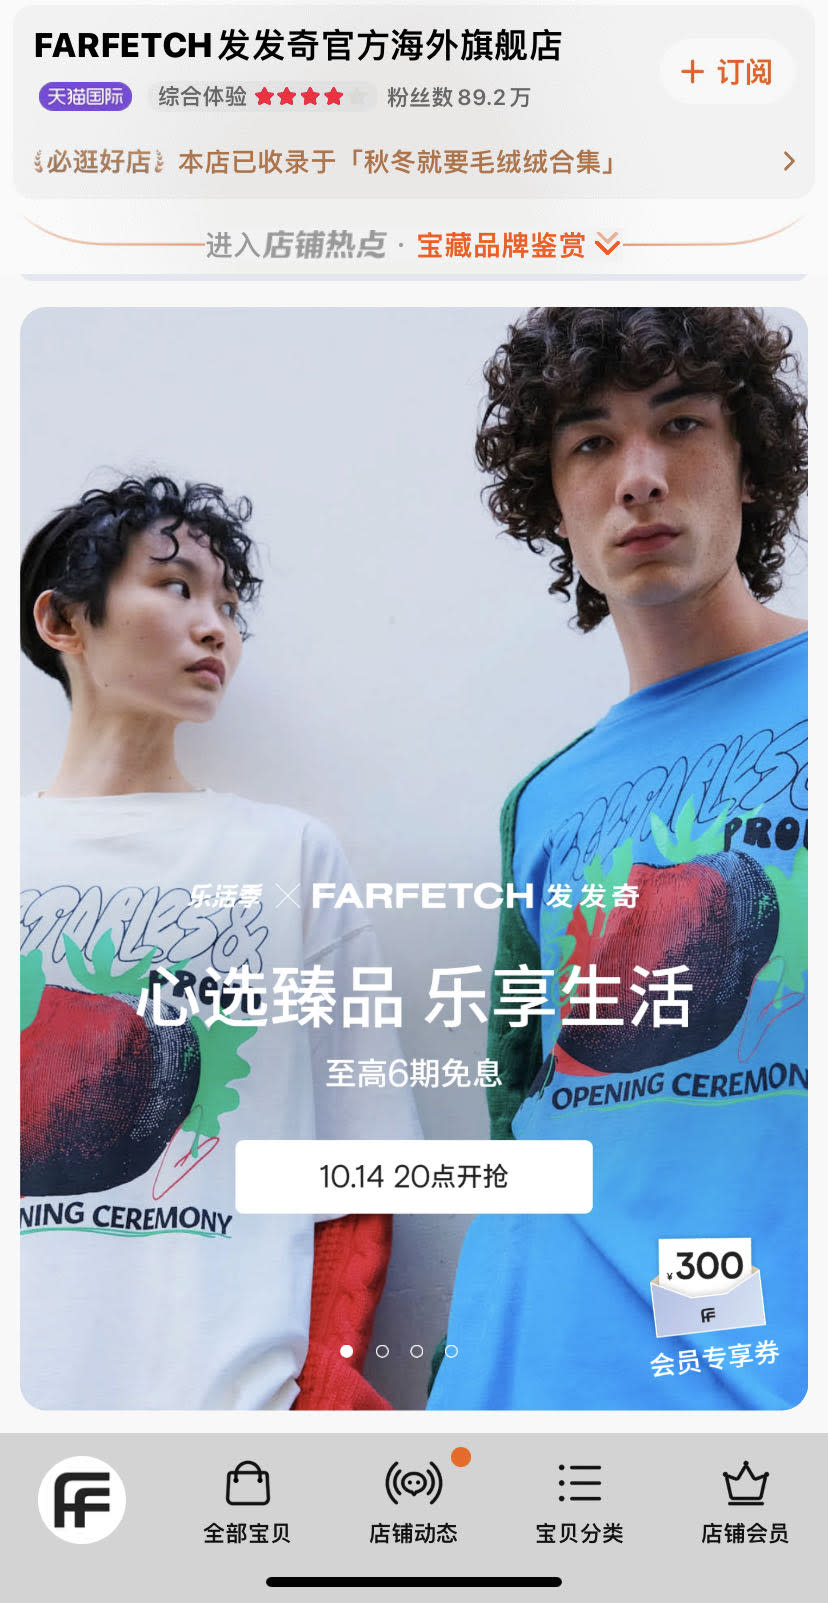 Farfetch’s flagship store on Tmall.